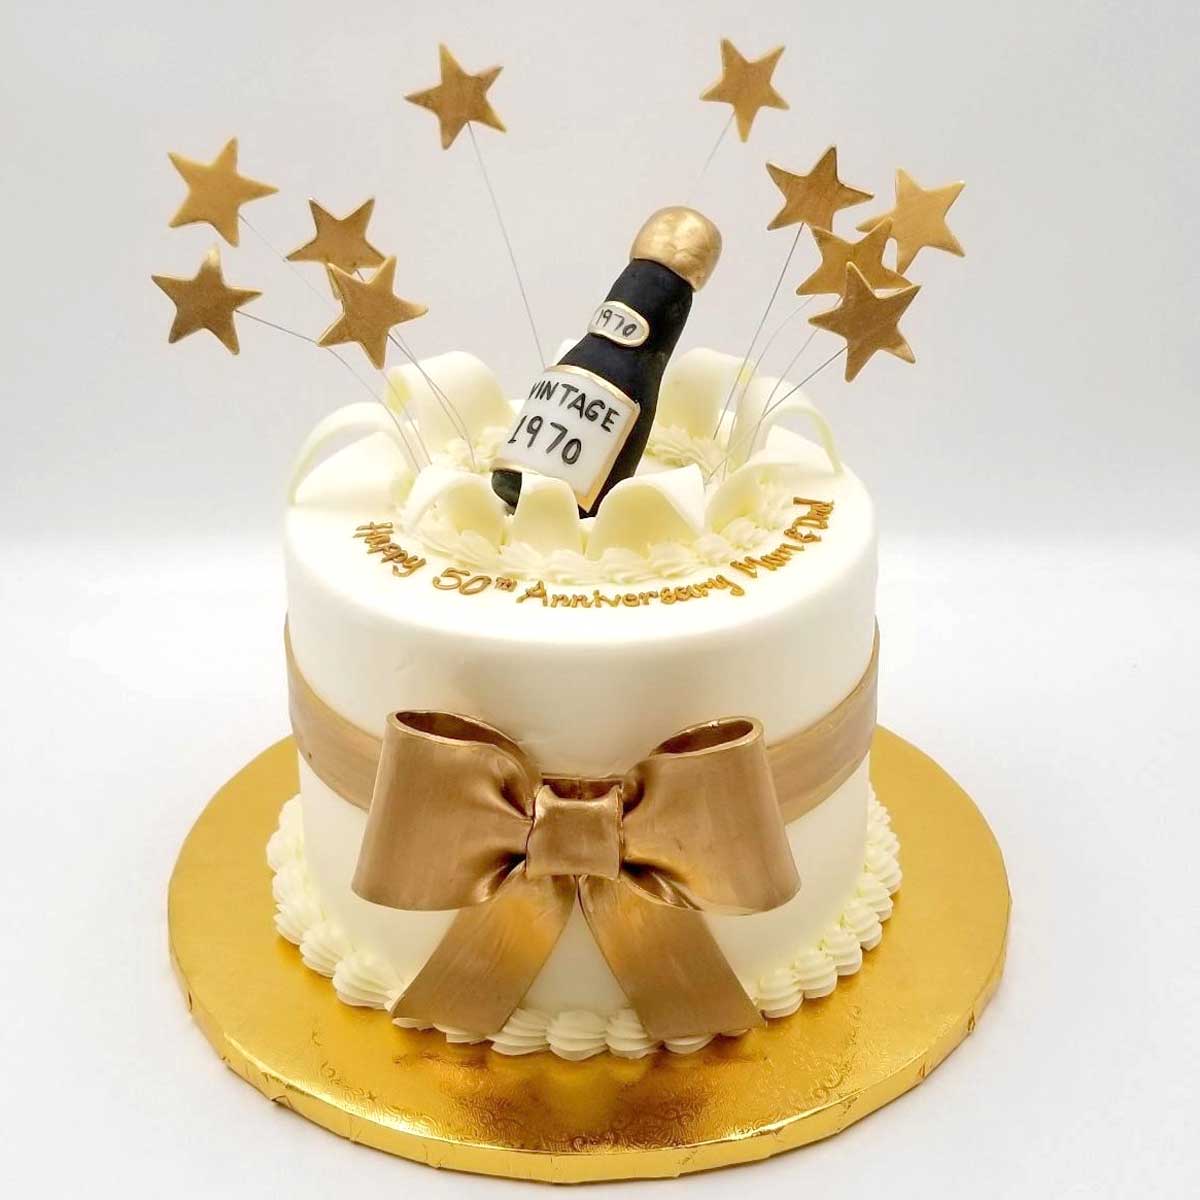 Taittinger Pink Champagne Bottle and Box Edible Cake Topper Image ABPI – A  Birthday Place